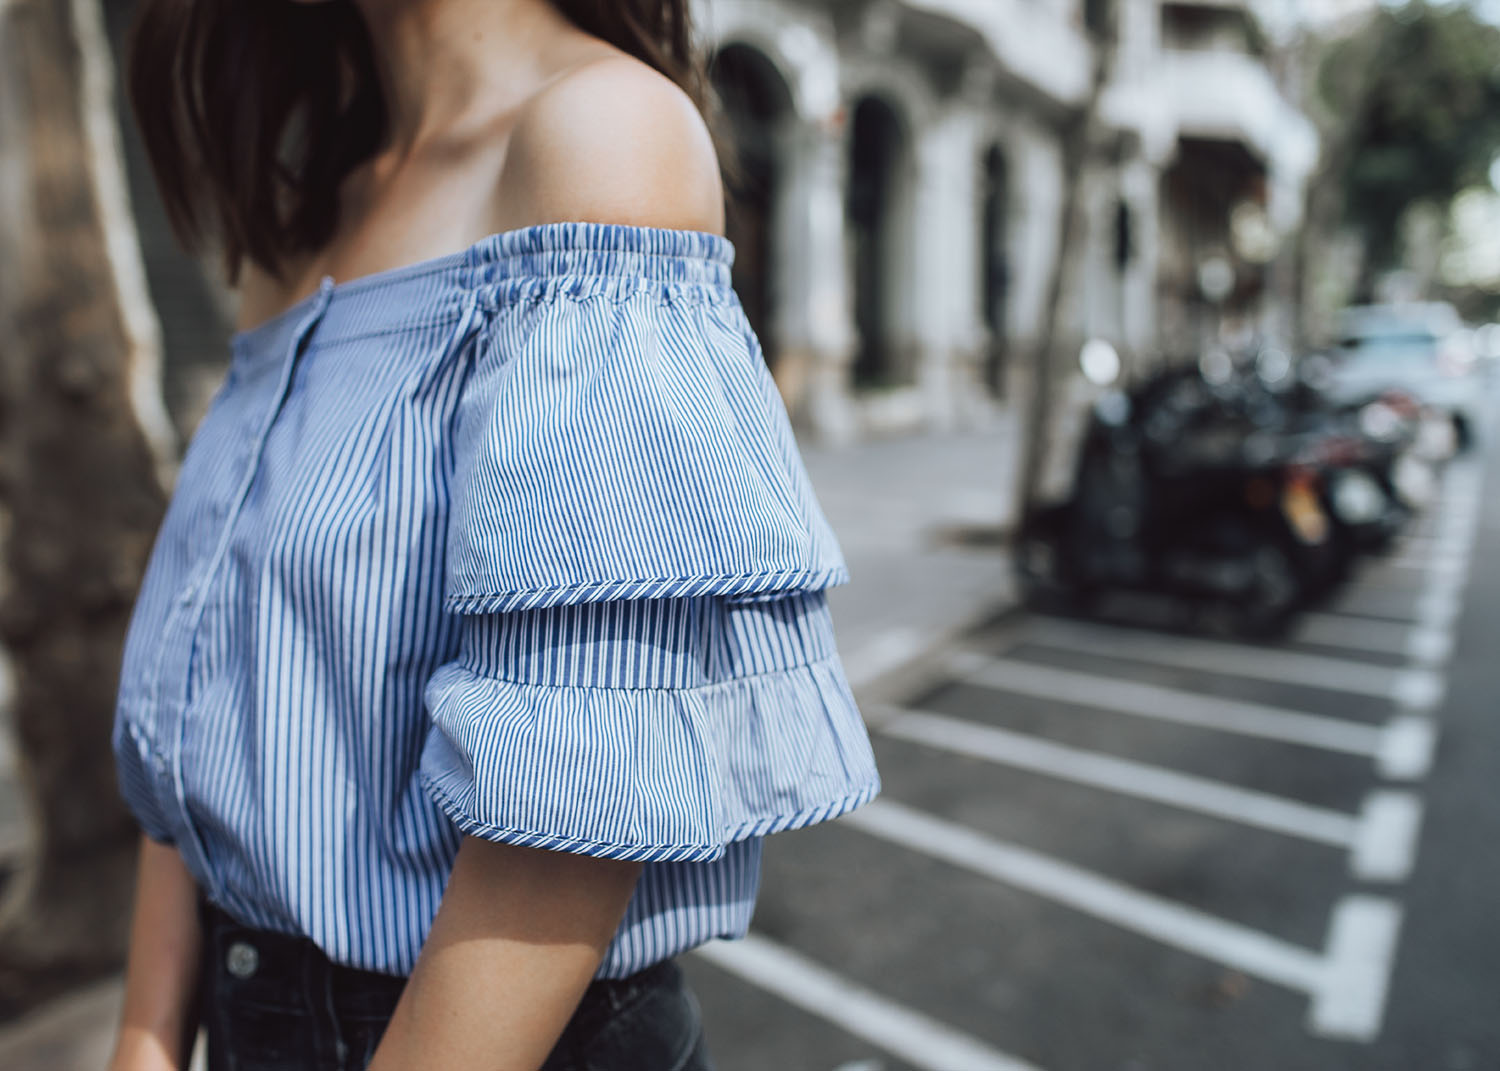 Lifestyle fashion travel blogger Jenny Tsang of Tsangtastic wearing off shoulder ruffle sleeve top and re/done levis jeans and roger vivier leather bag in Barcelona Spain.